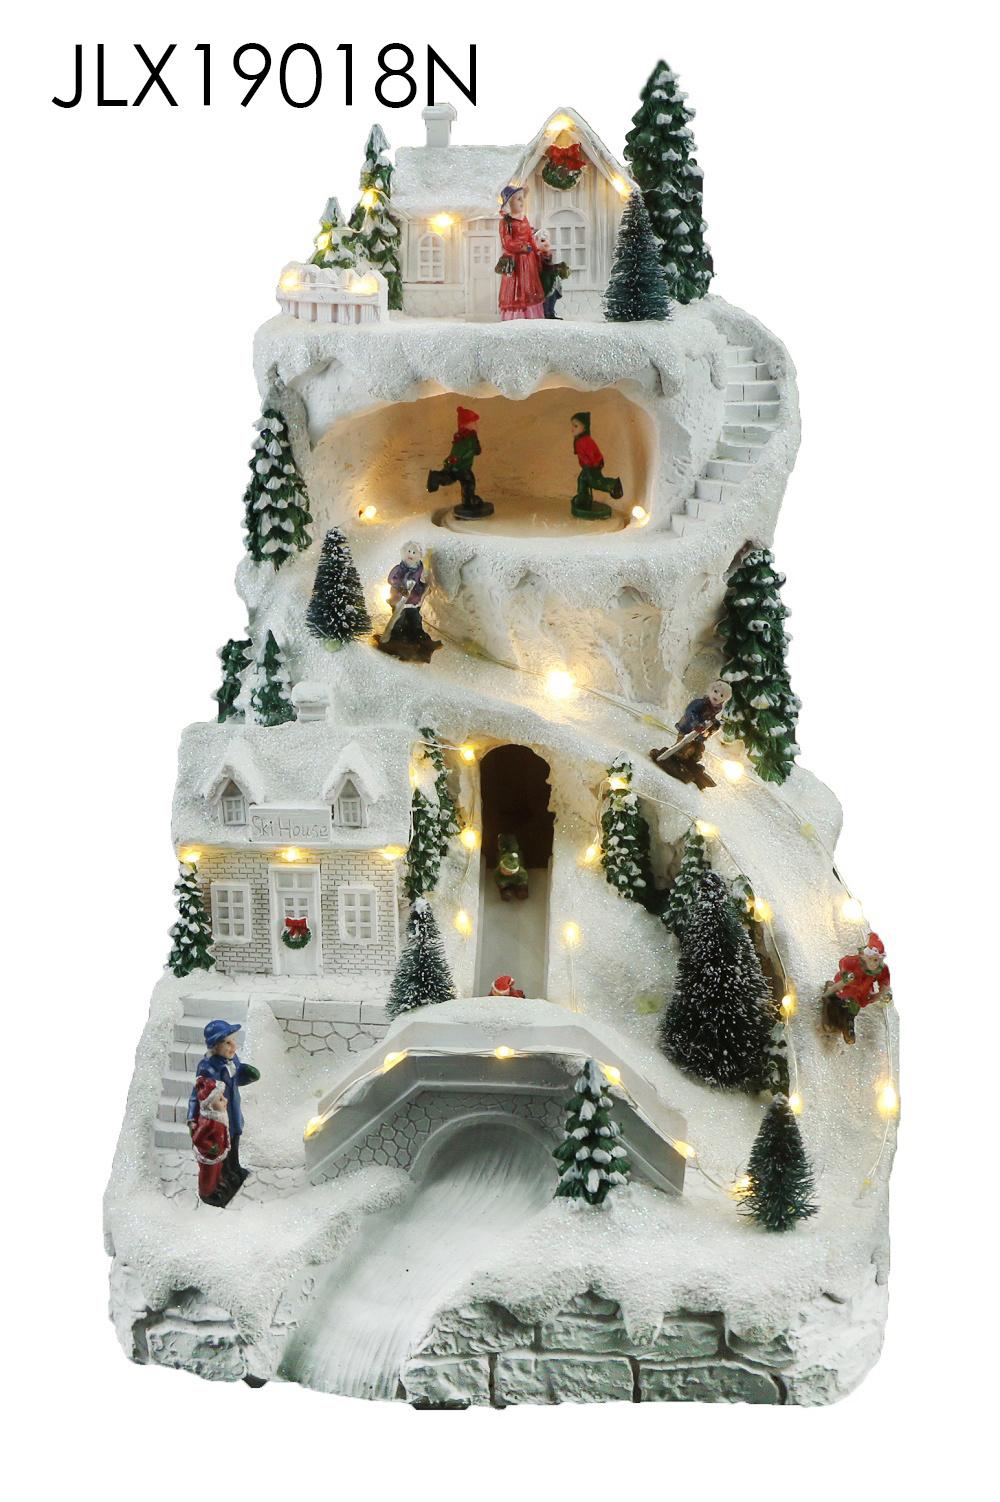 Christmas Hillside House with LED Lights and Train Christmas Tree Rotation Feature with 8 Songs Music for Decorations